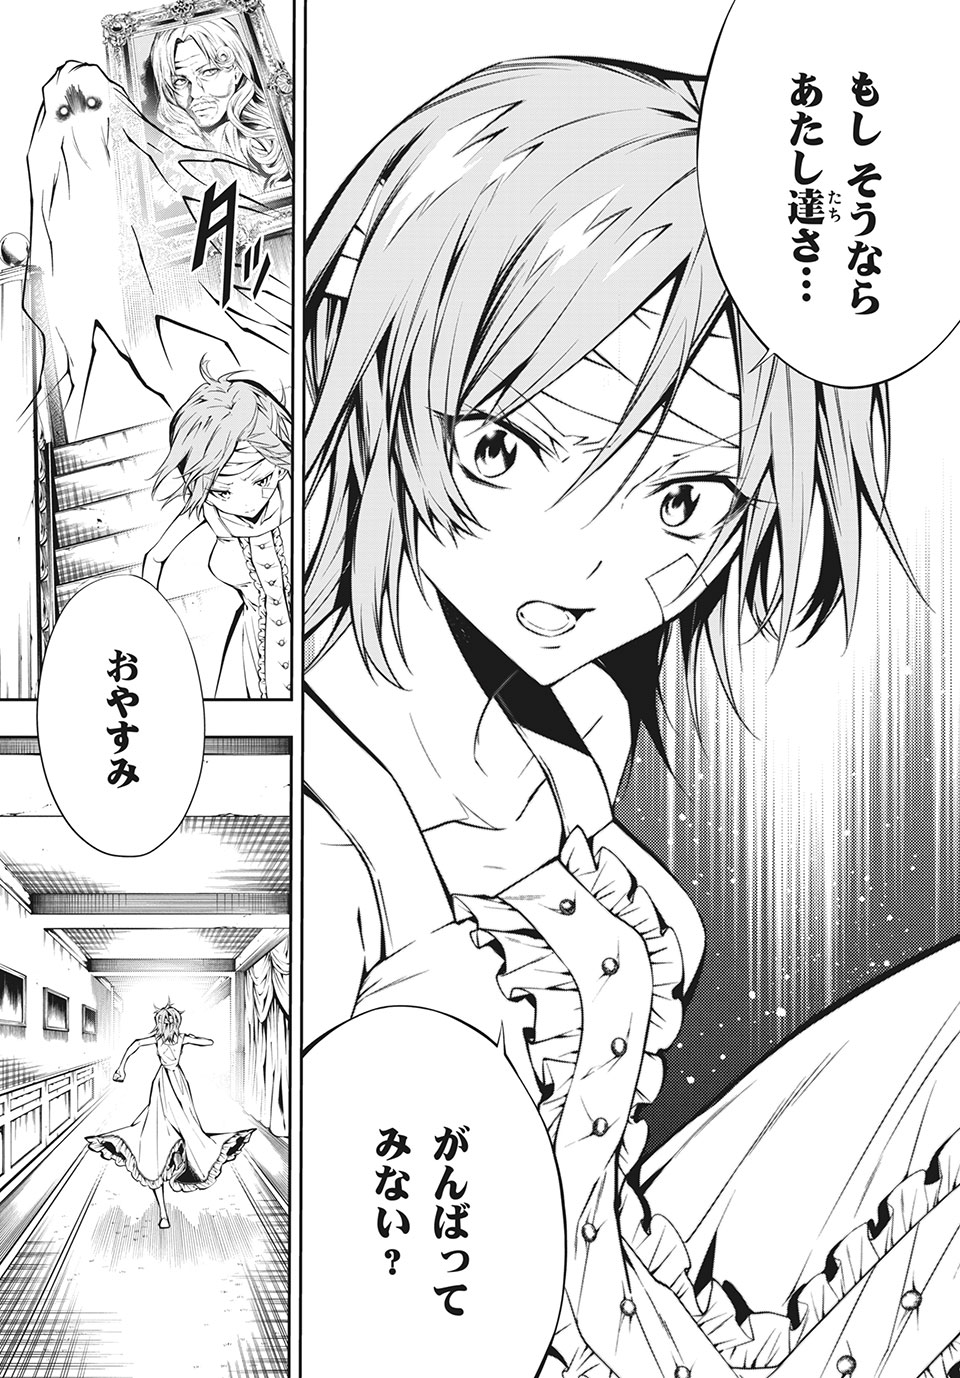 Shaman King: and a garden 第1.3話 - Page 7